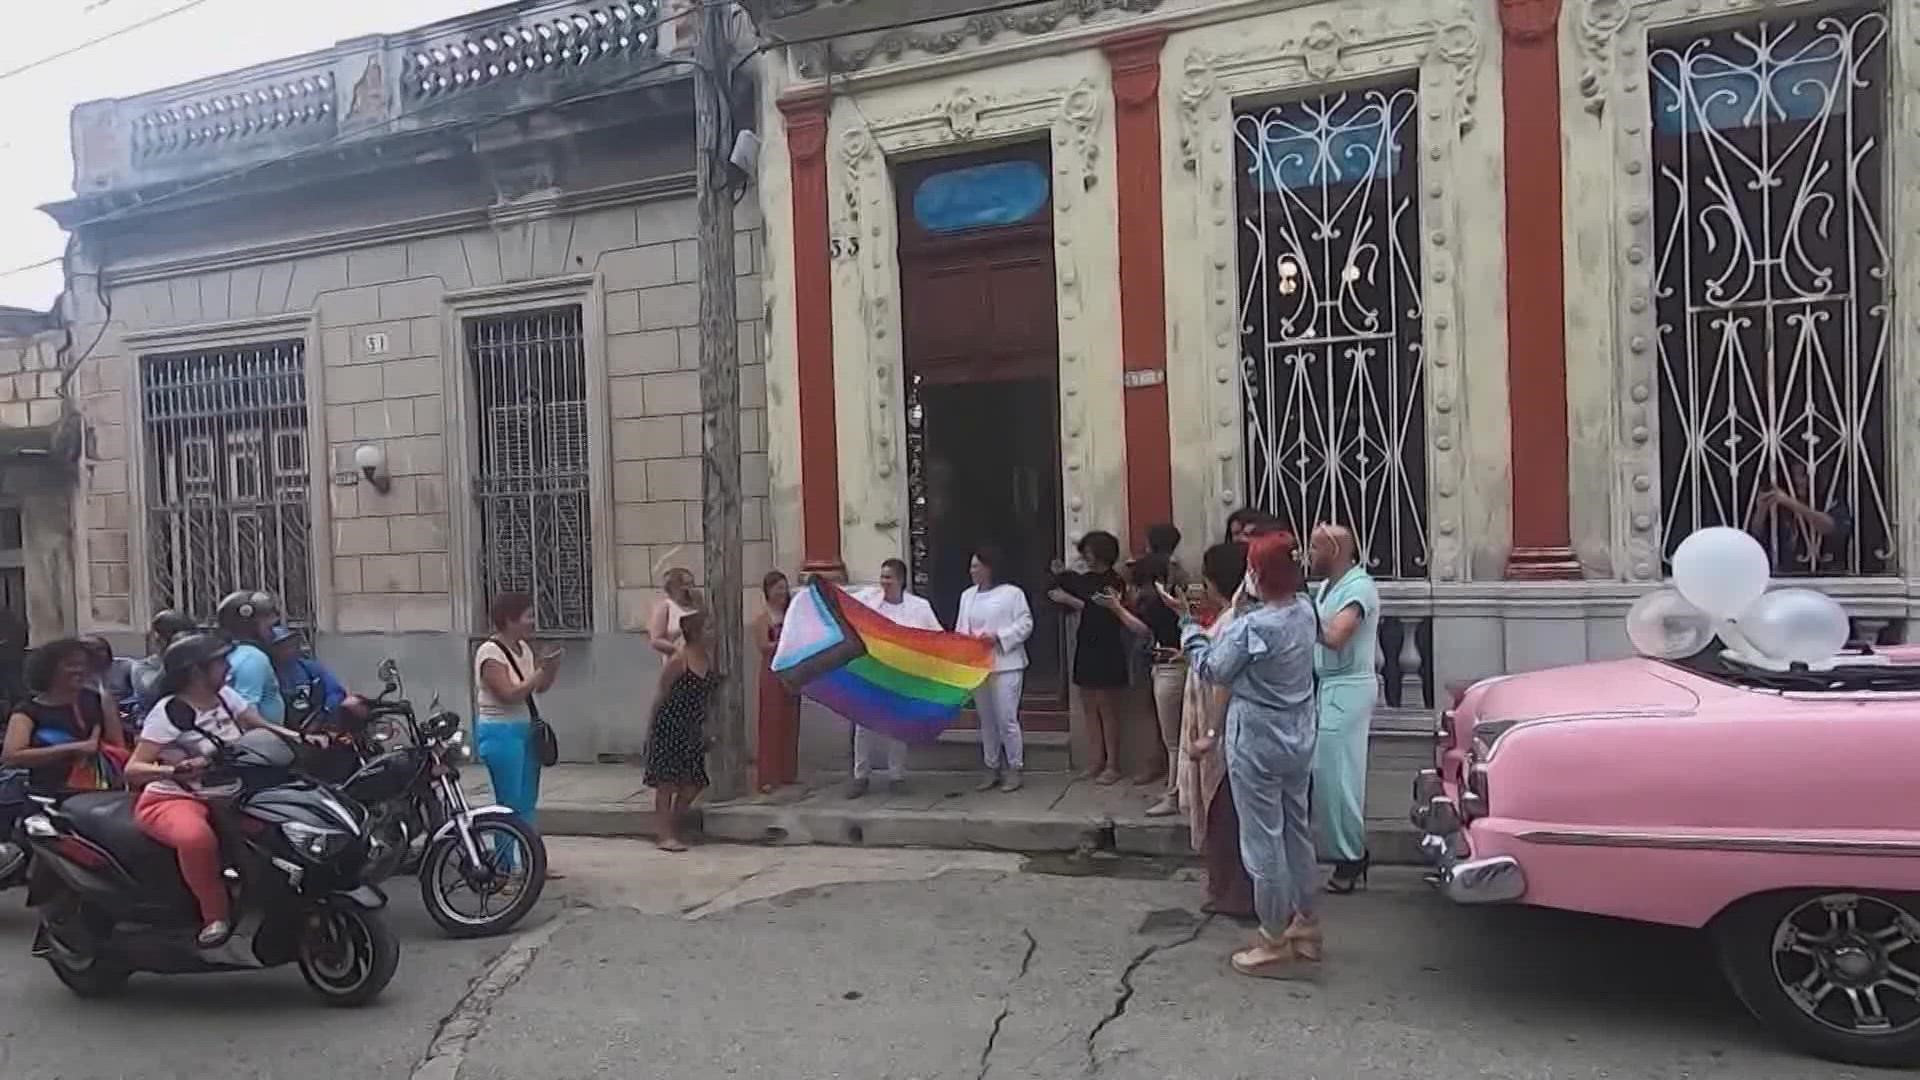 Gay couple can now get married in Cuba. Voters on the island legalized gay marriage in a referendum yesterday.